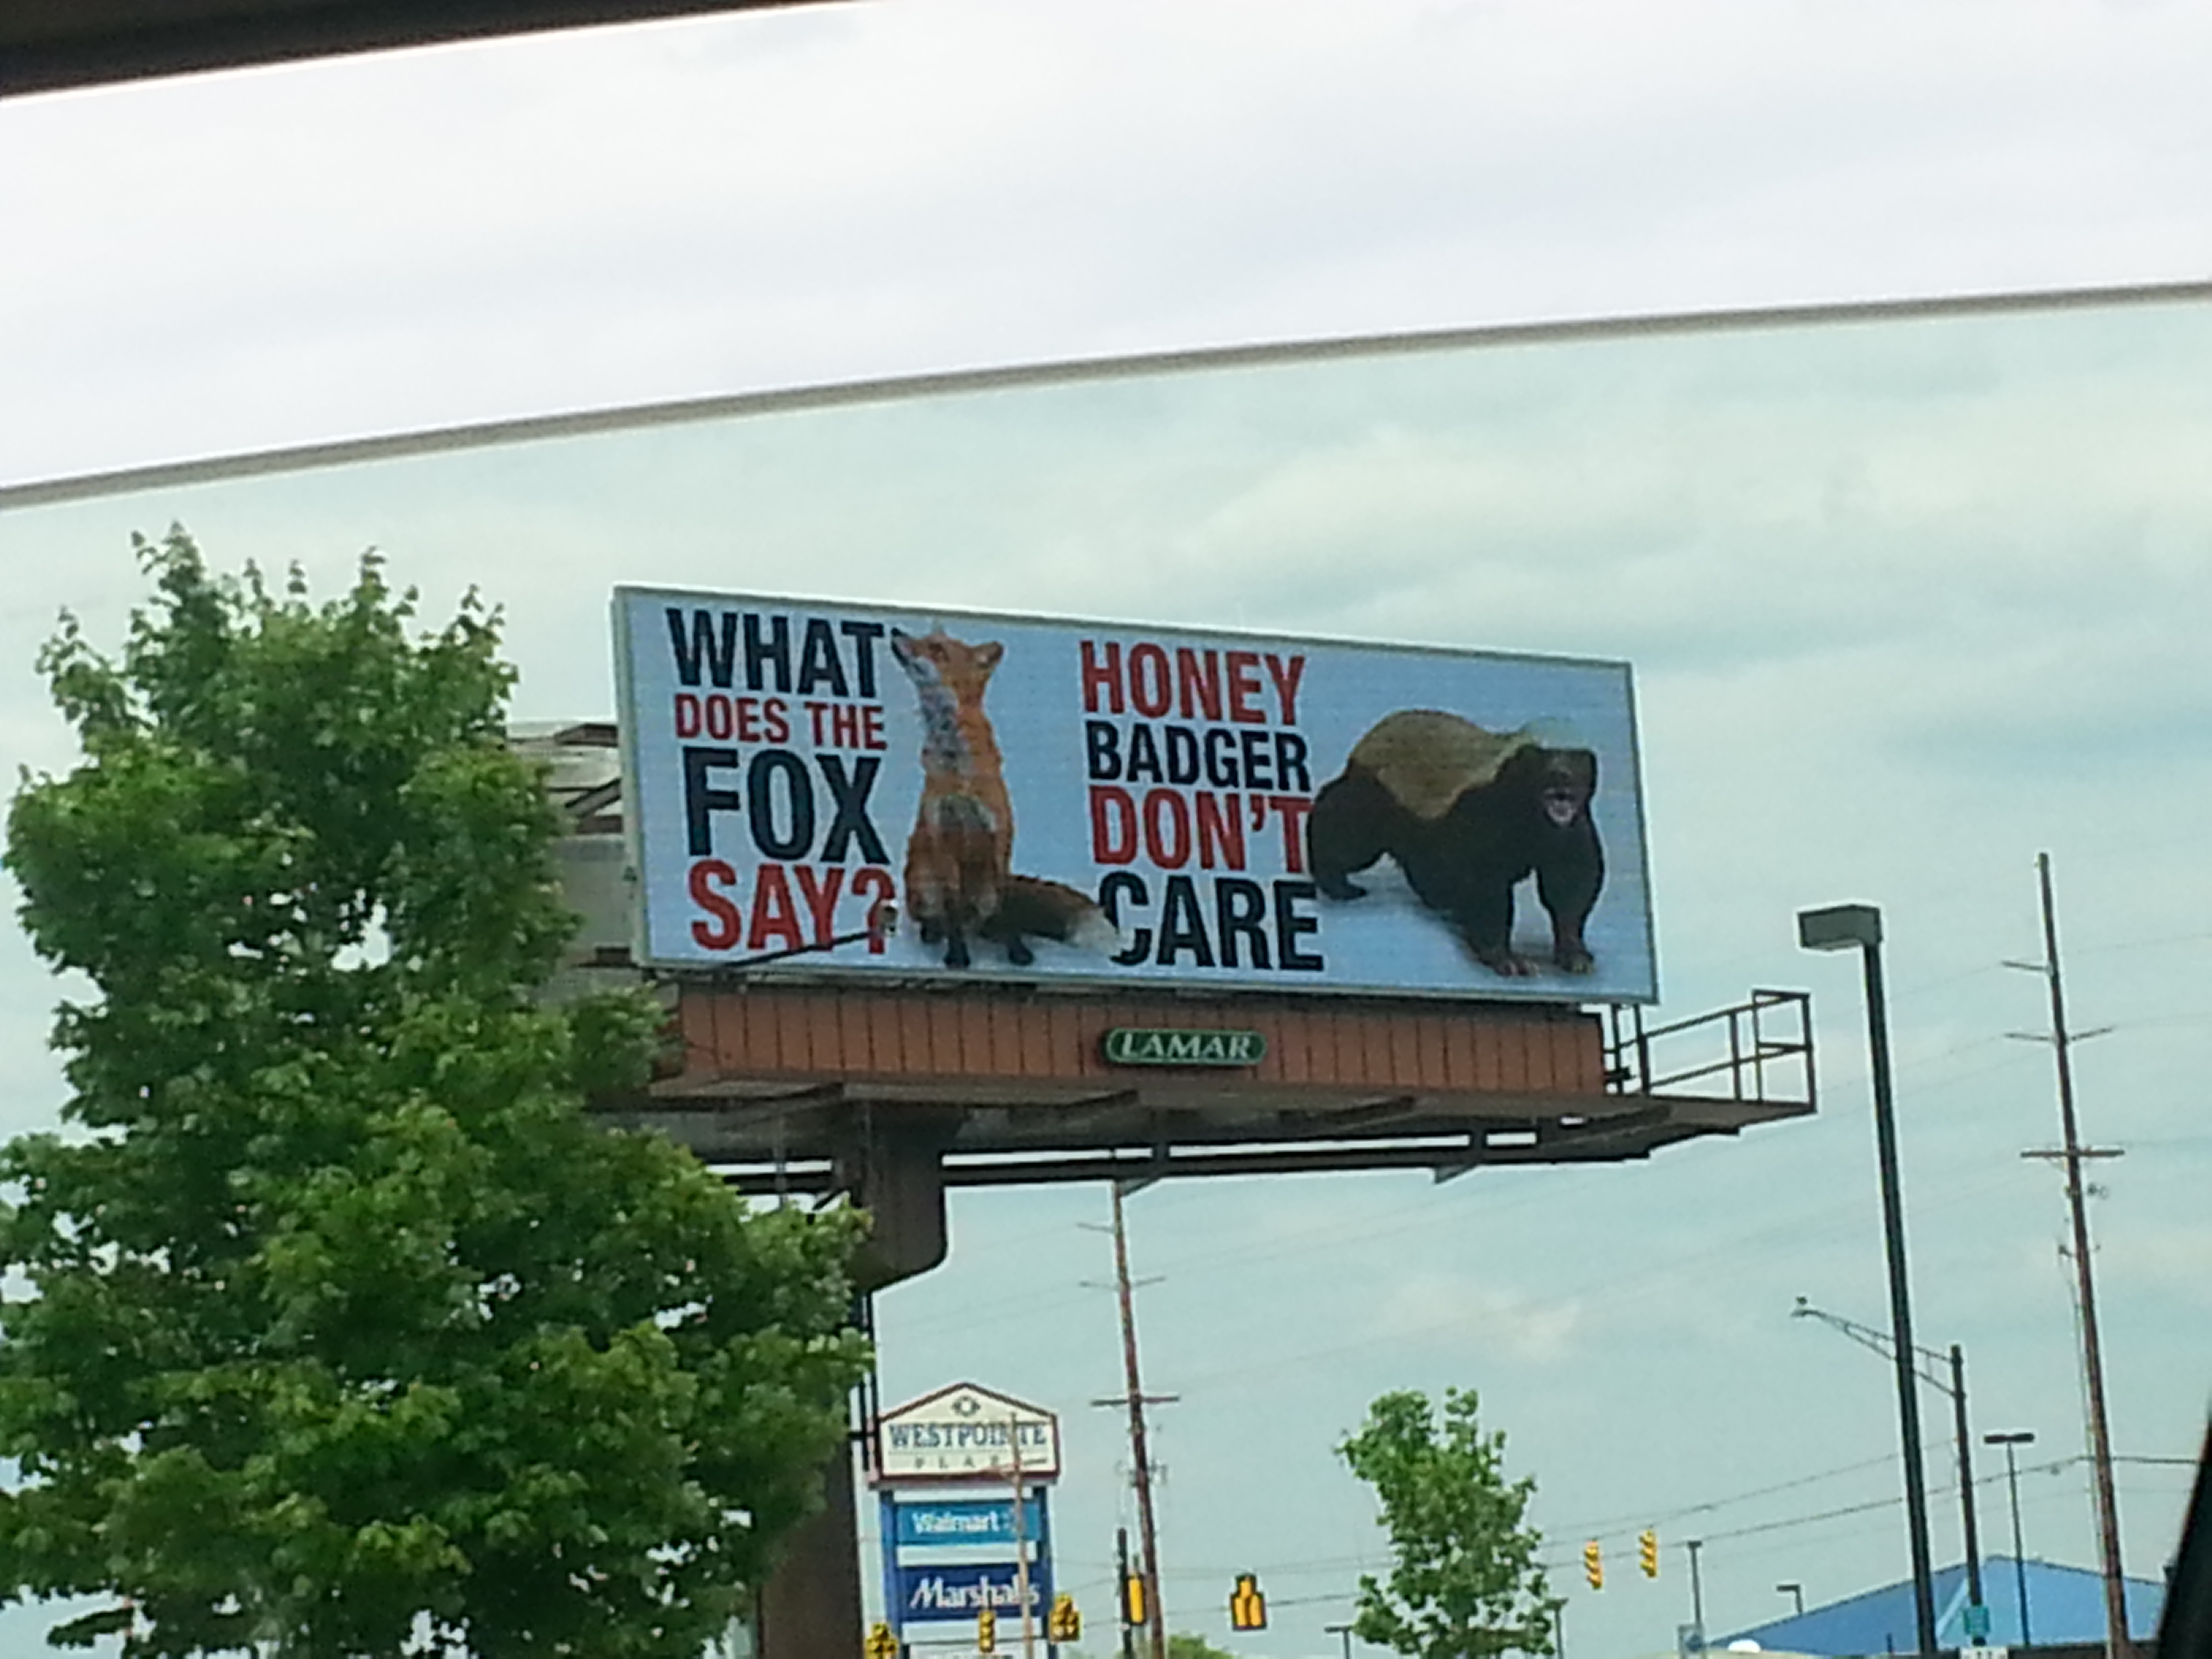 billboard - What Does The Honey Badger Fox Say Don'T Care Lamar